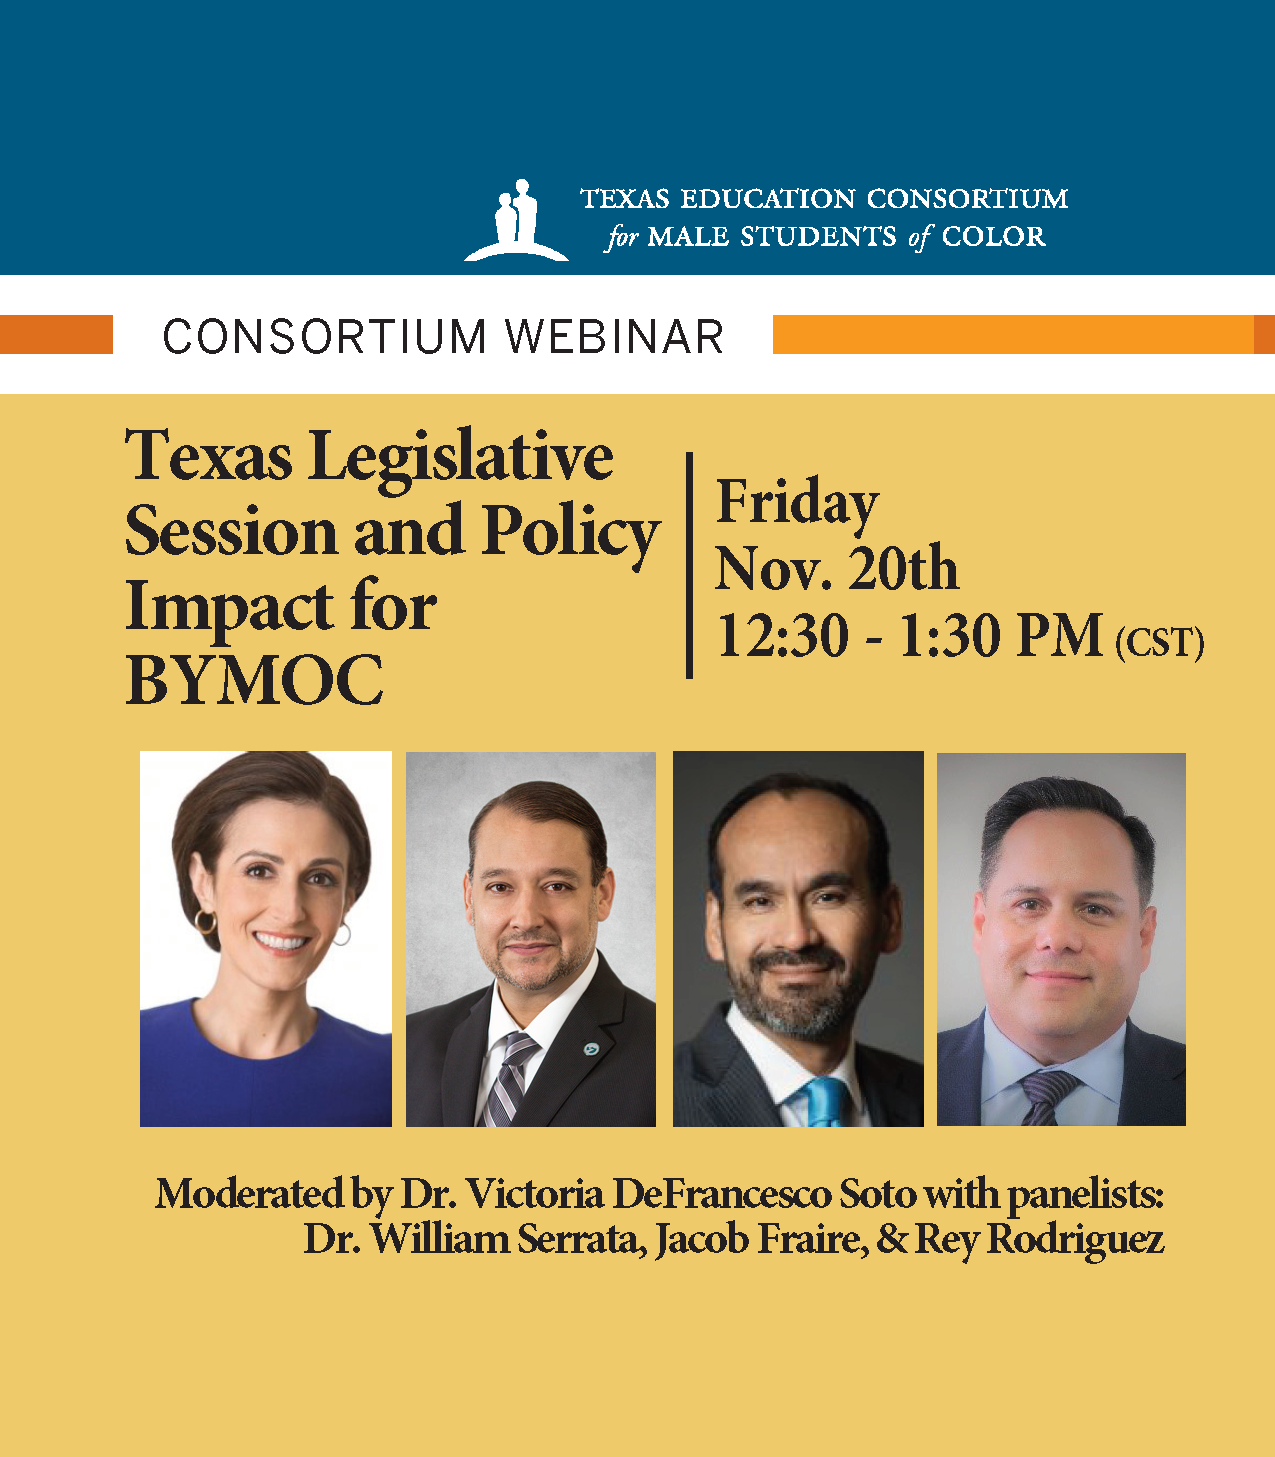 Texas Legislative Session and Policy Impact for BYMOC. Headshots of speakers: Dr. Soto, Dr. Serrata, Fraire, and Rodriguez.